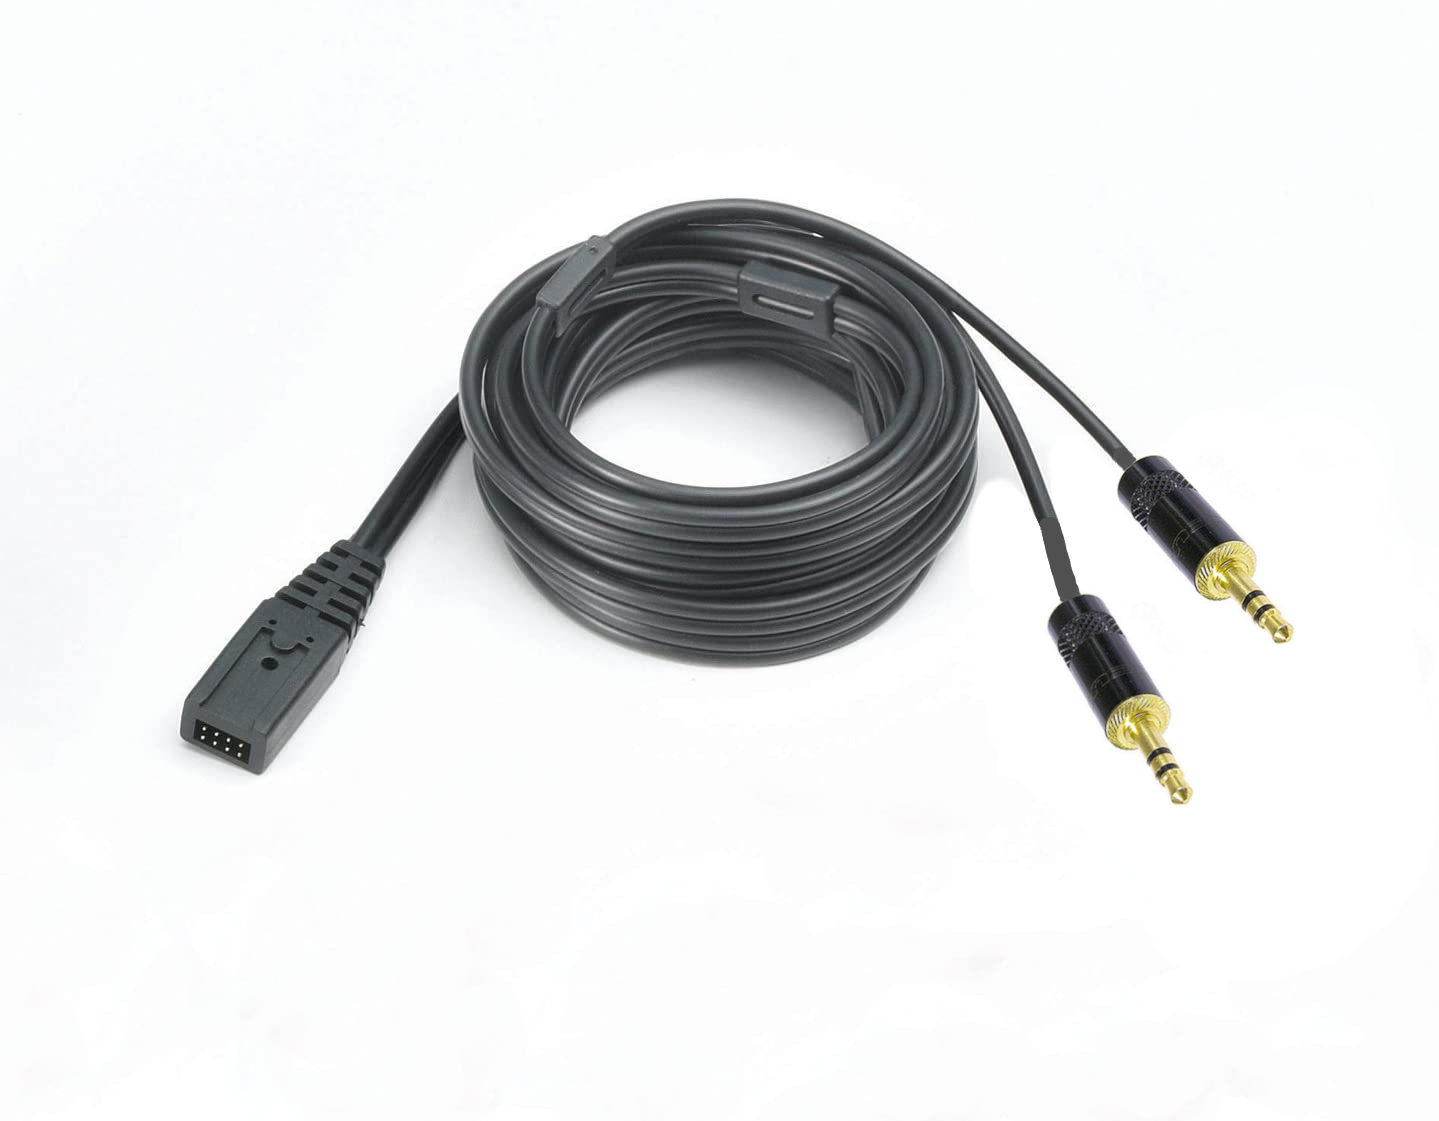 Audio Technica/Sound Professionals BPCB1-3.5MMx2 - Replacement cable ...